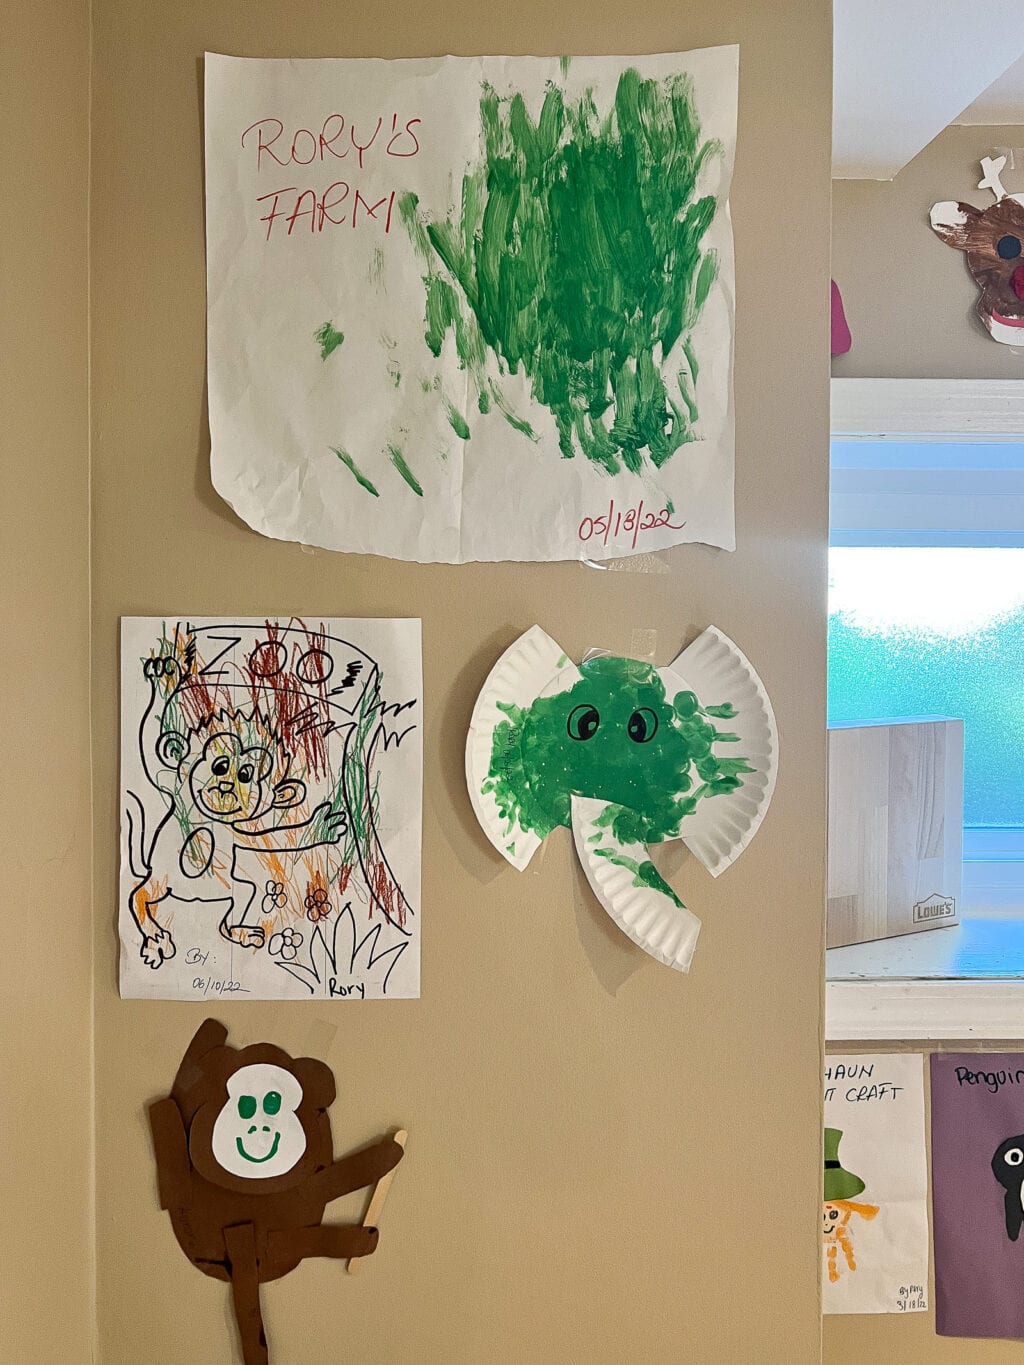 Rory's artwork in the basement